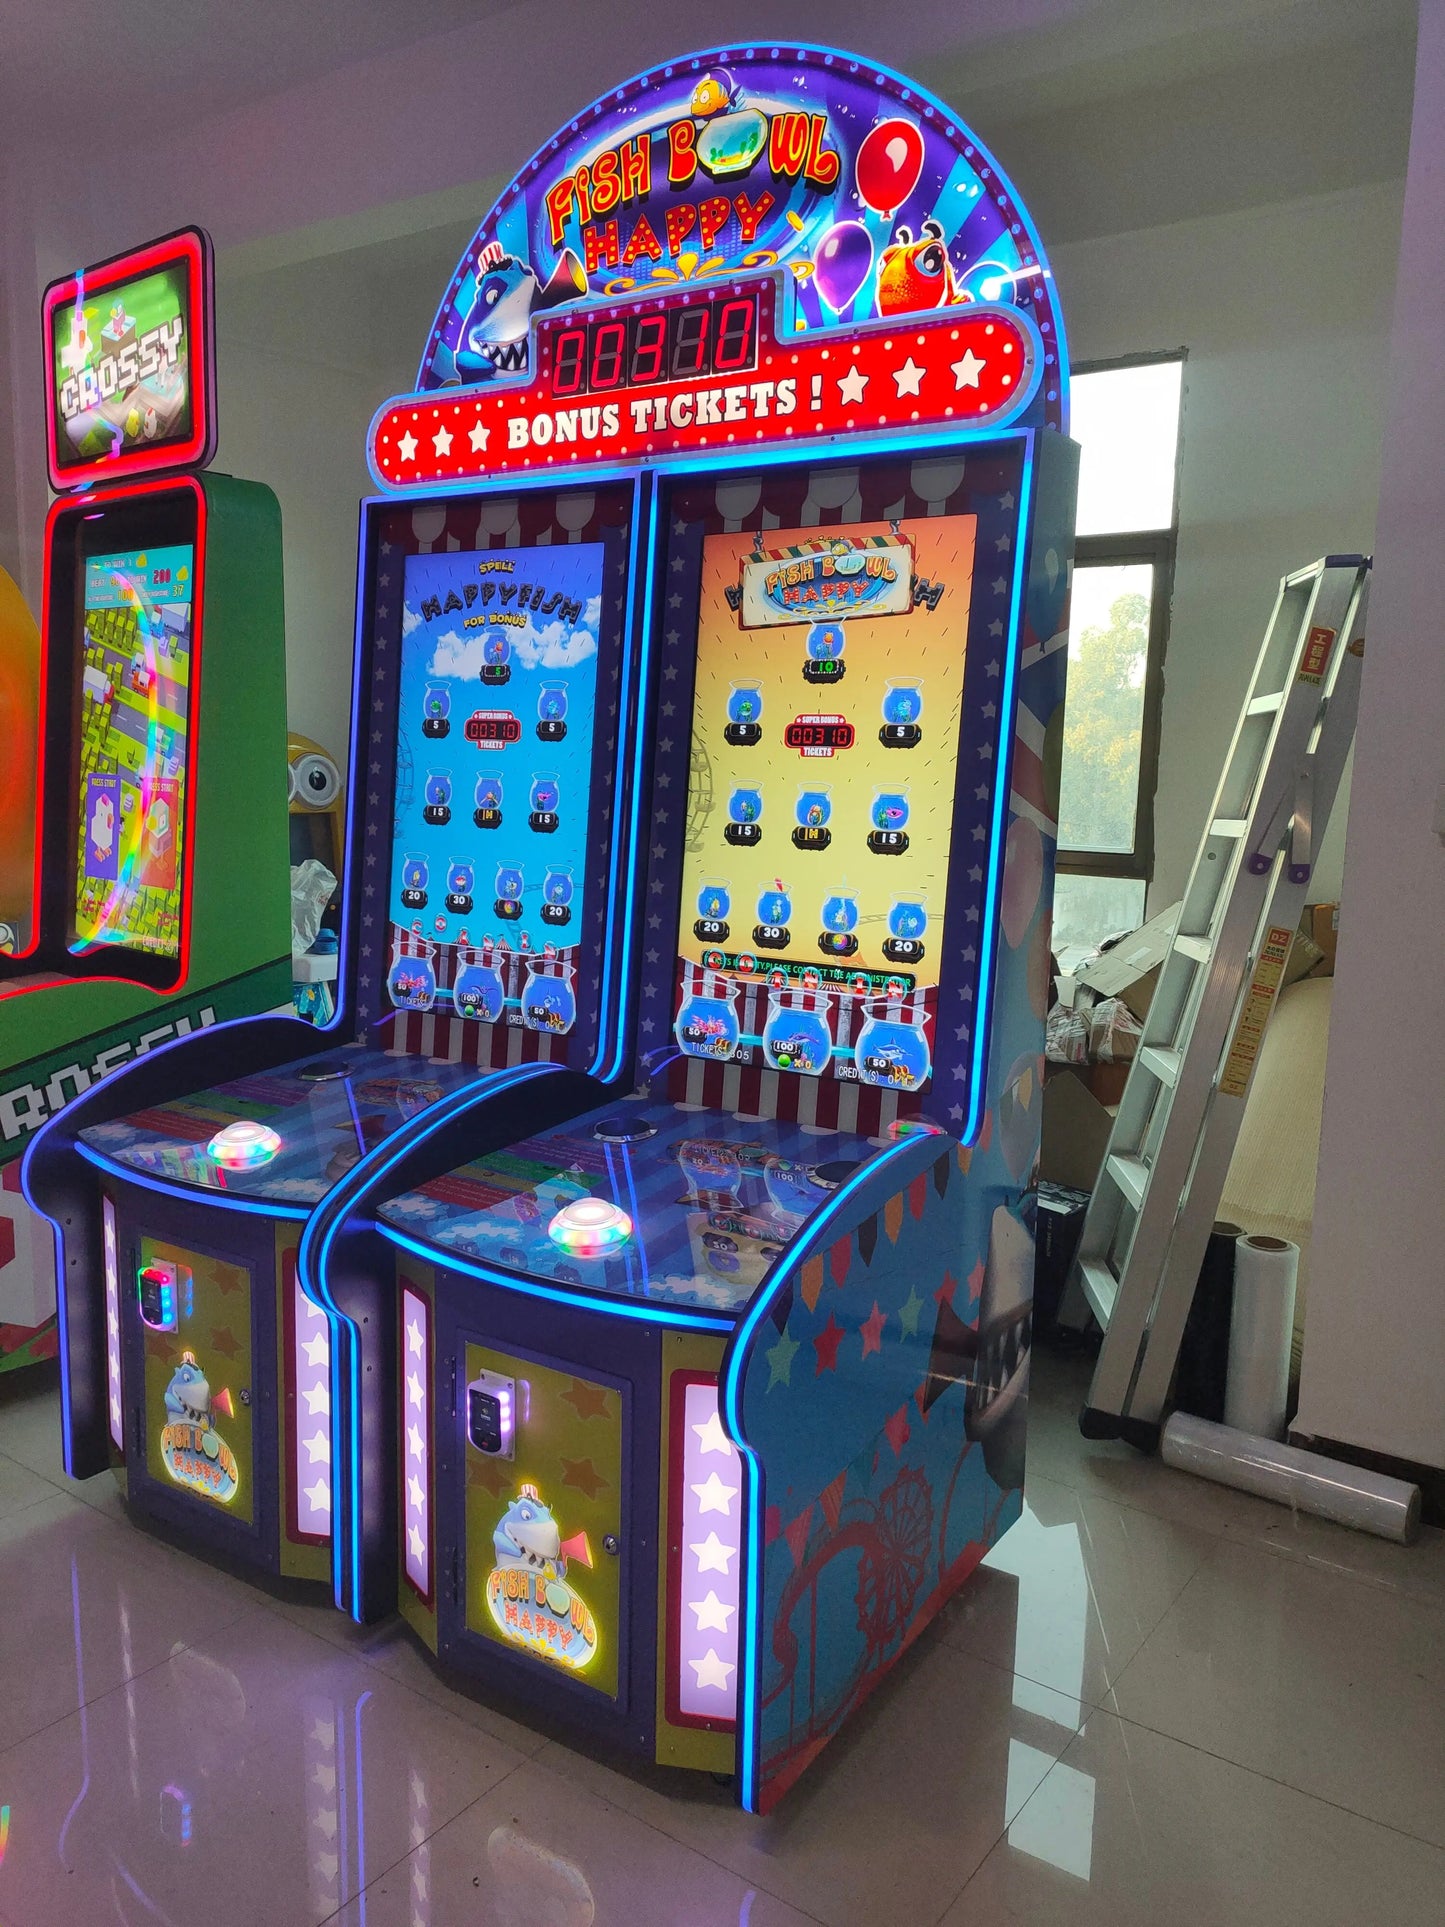 Happy-Fish-Bowl-Tickets-redemption-games-Amusement-Coin-Operated-Video-Lottery-redemption-Arcade-game-Machine-Tomy Arcade